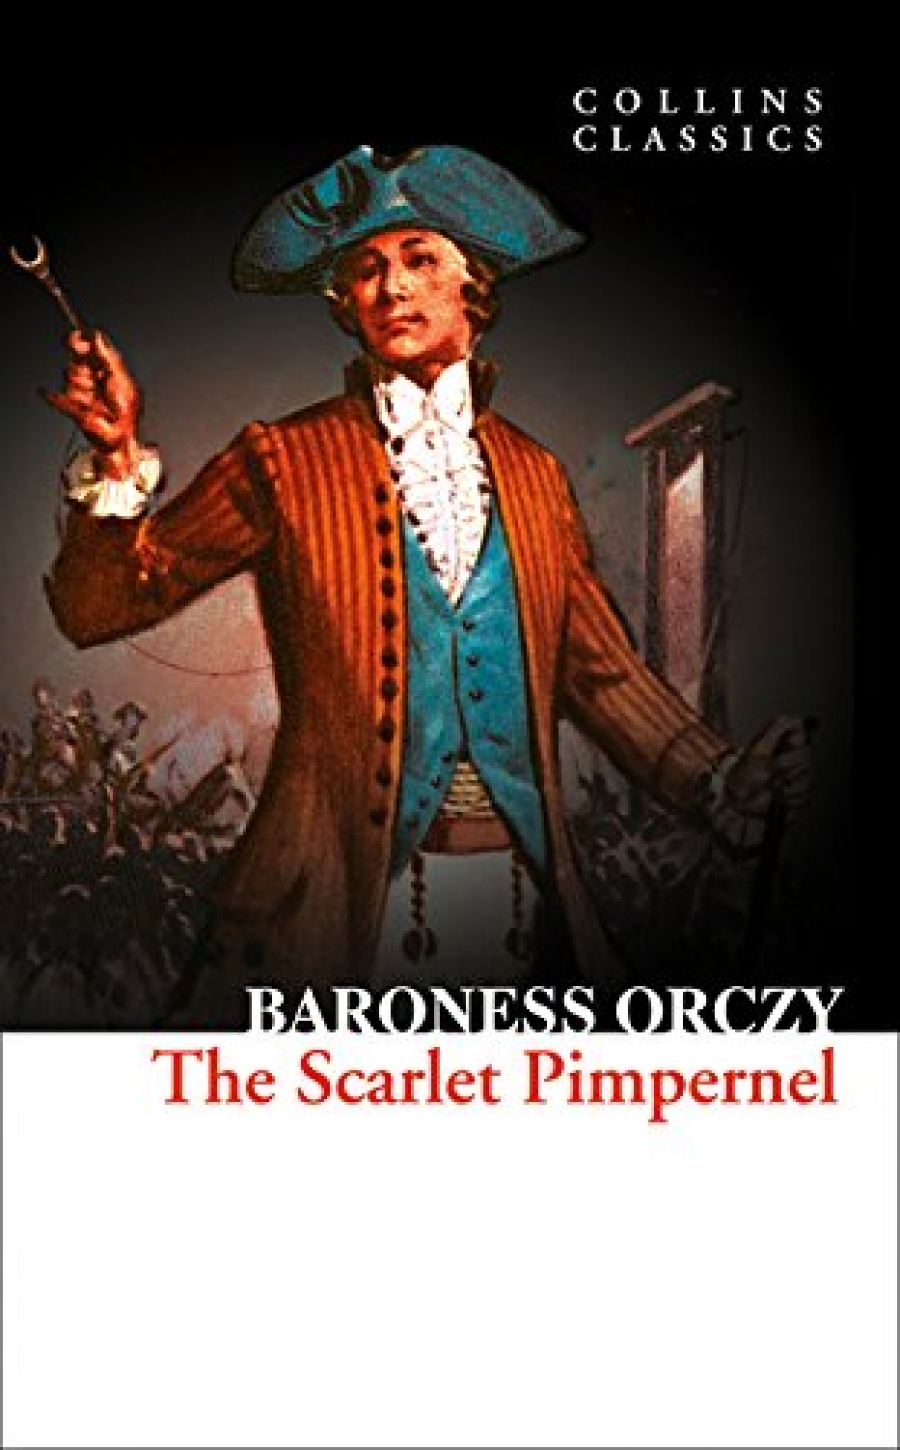 Orczy, Baroness Scarlet Pimpernel, the 